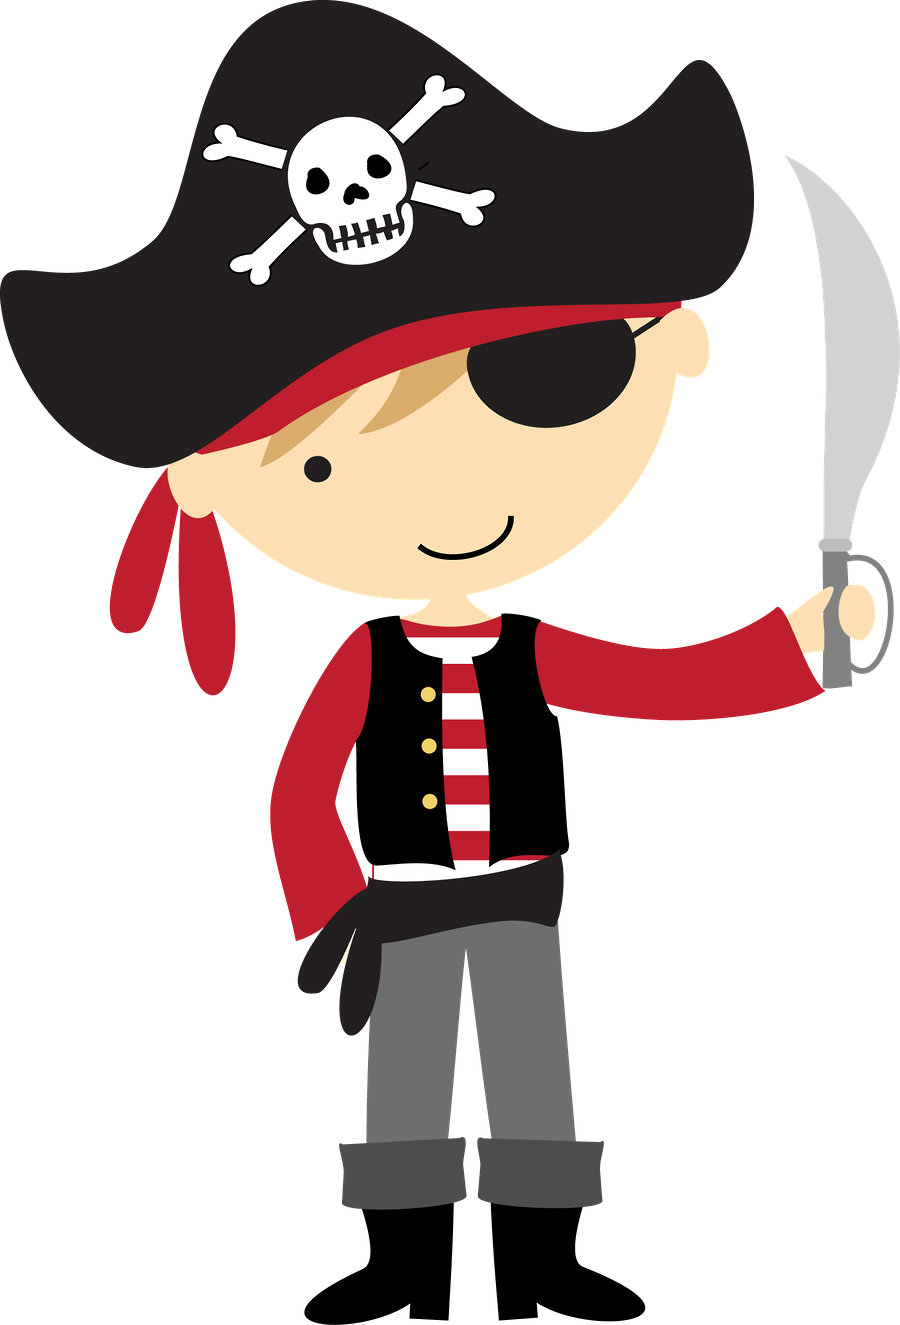 Pirate clipart shark. Png image purepng free